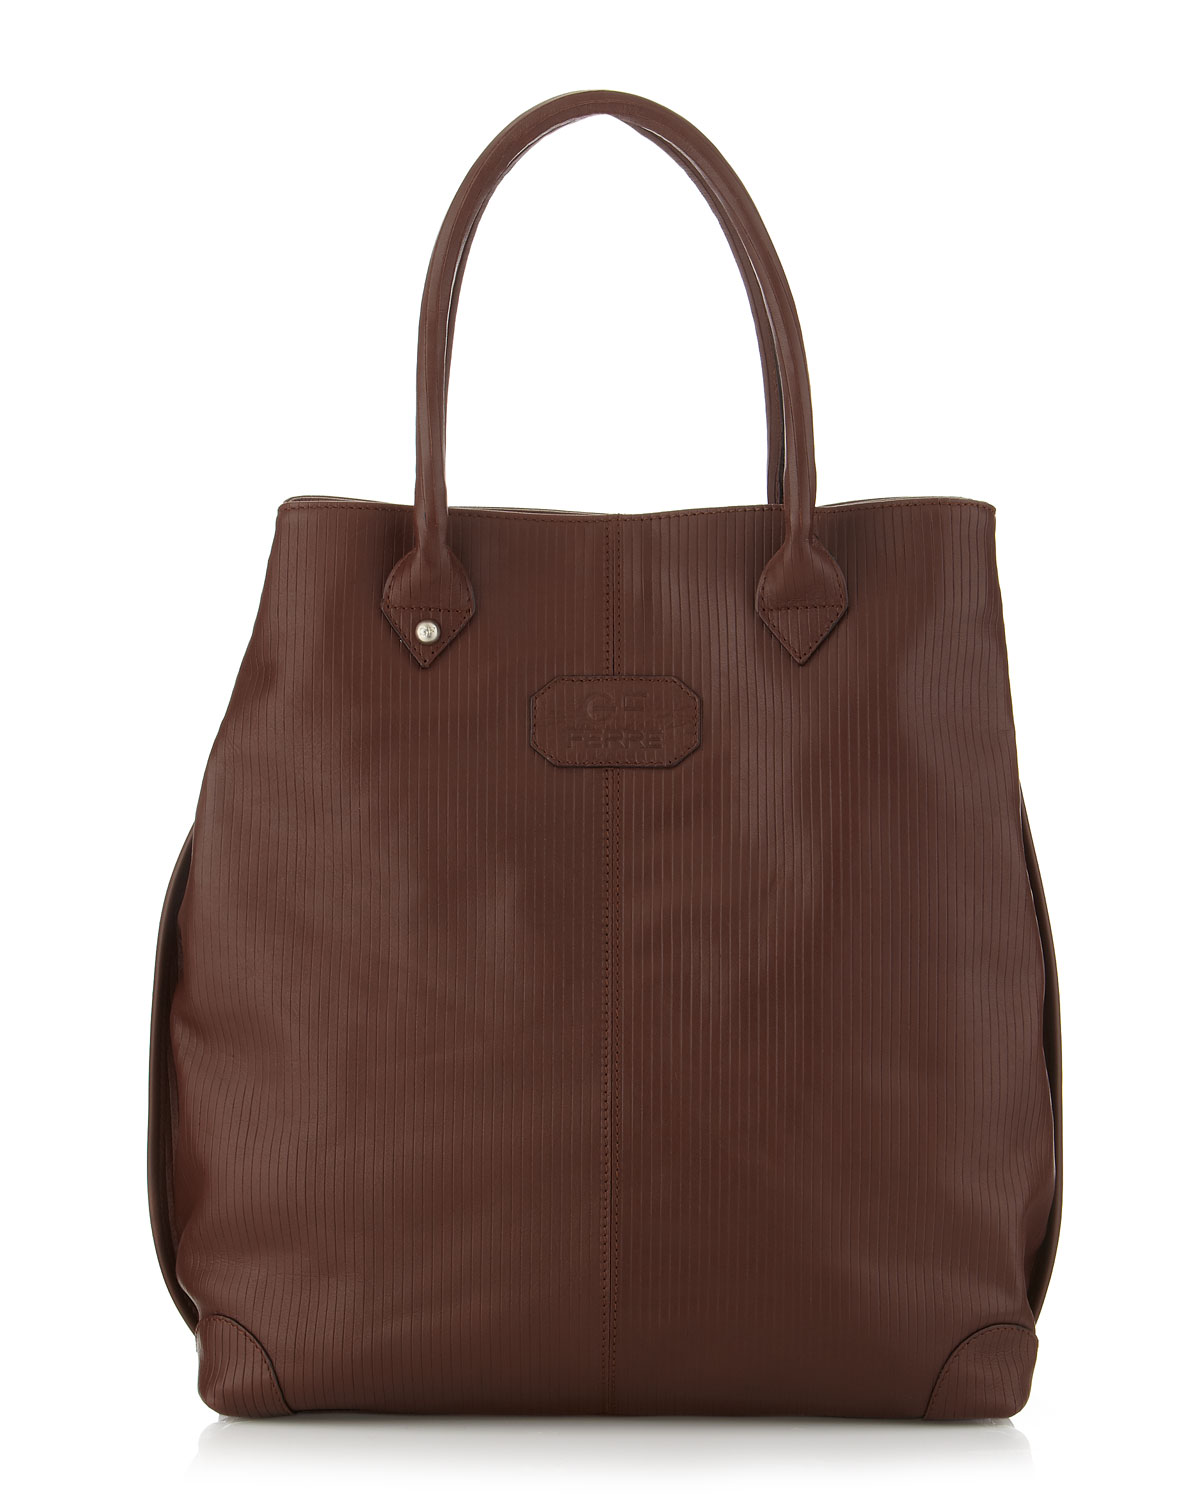 Gianfranco Ferré Large Lined Leather Tote Bag in Brown | Lyst